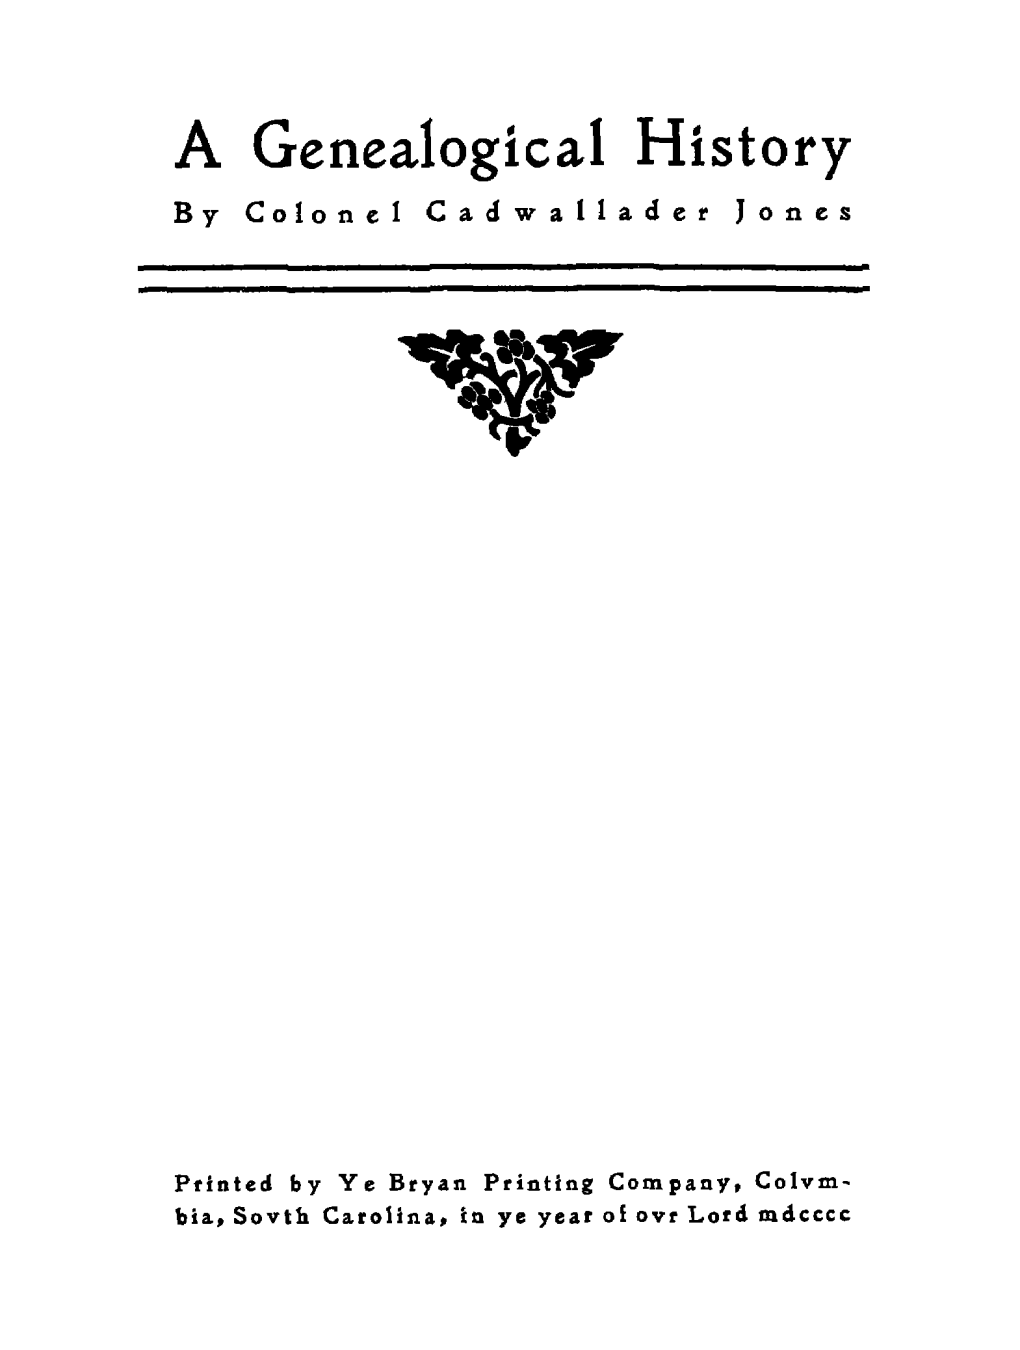 A Genealogical History by Colonel Cadwallader Jones